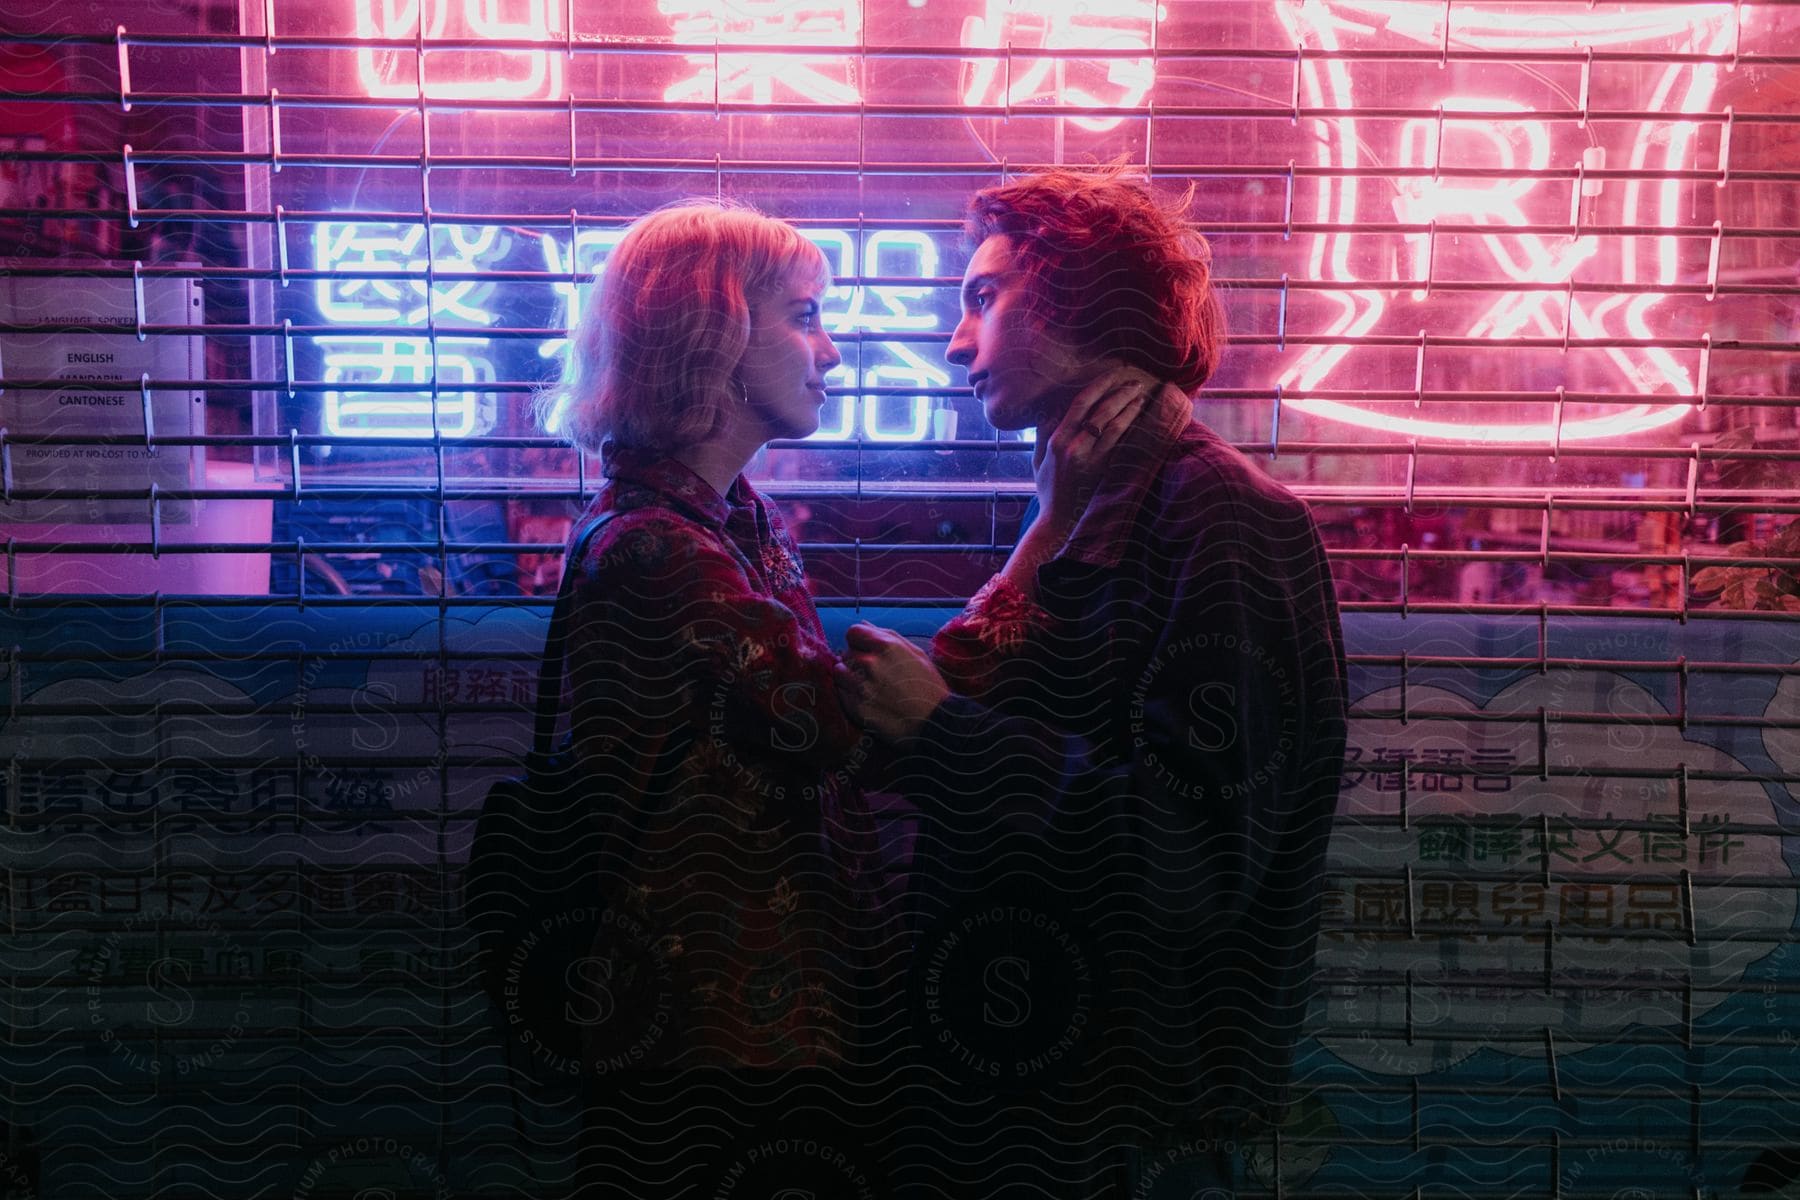 A couple stands in front of a business with neon signs lit inside at night